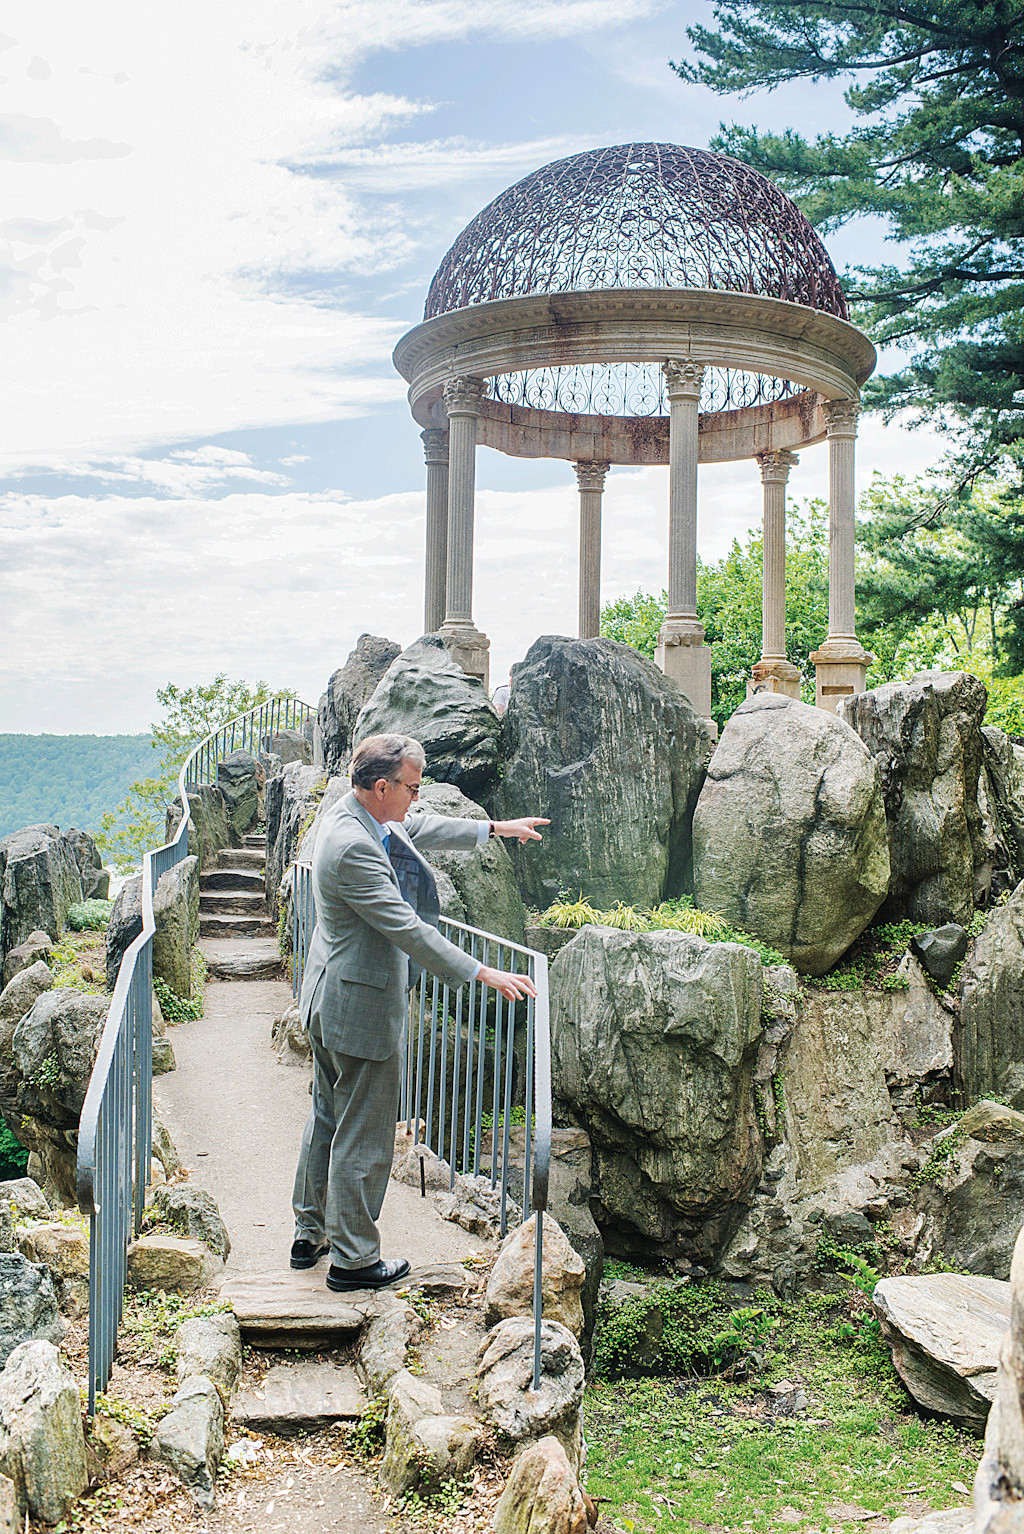 Volunteer chairman of the Untermyer Gardens Conservancy Stephen Byrns gives a tour of the 'Temple of Love,' which the conservancy hopes to restore over the next one or two years.